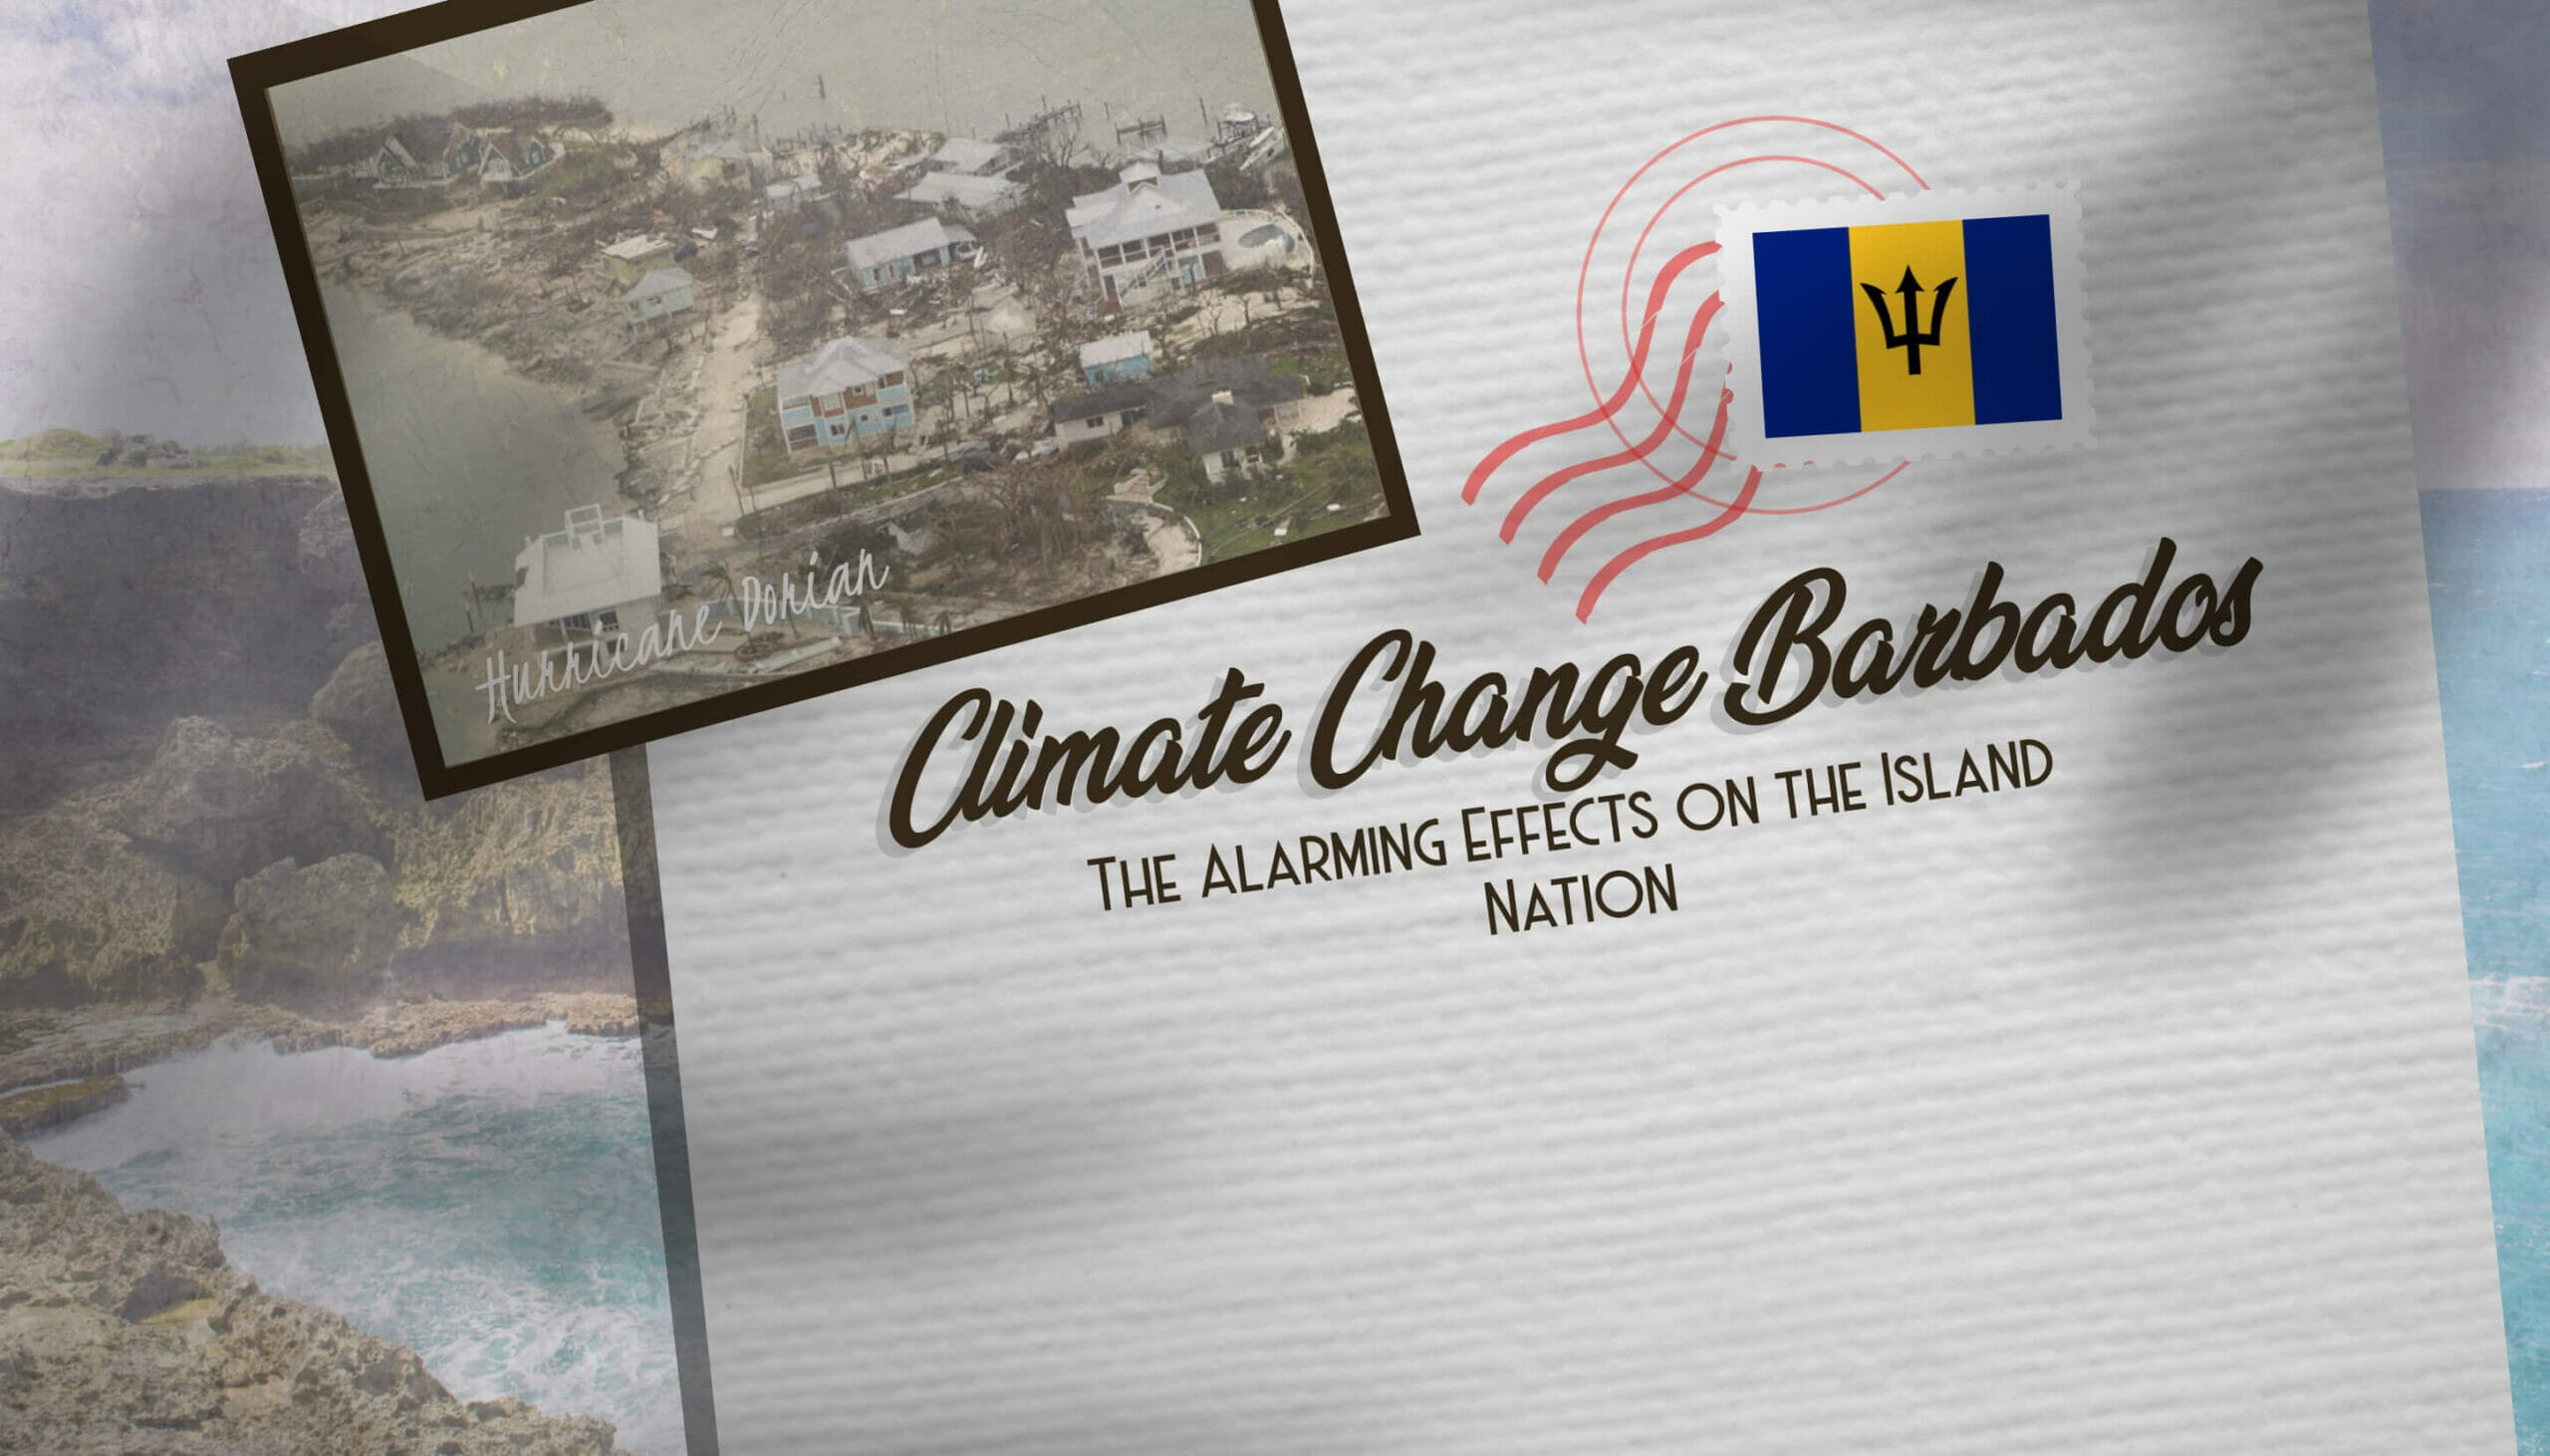 Climate Change Barbados